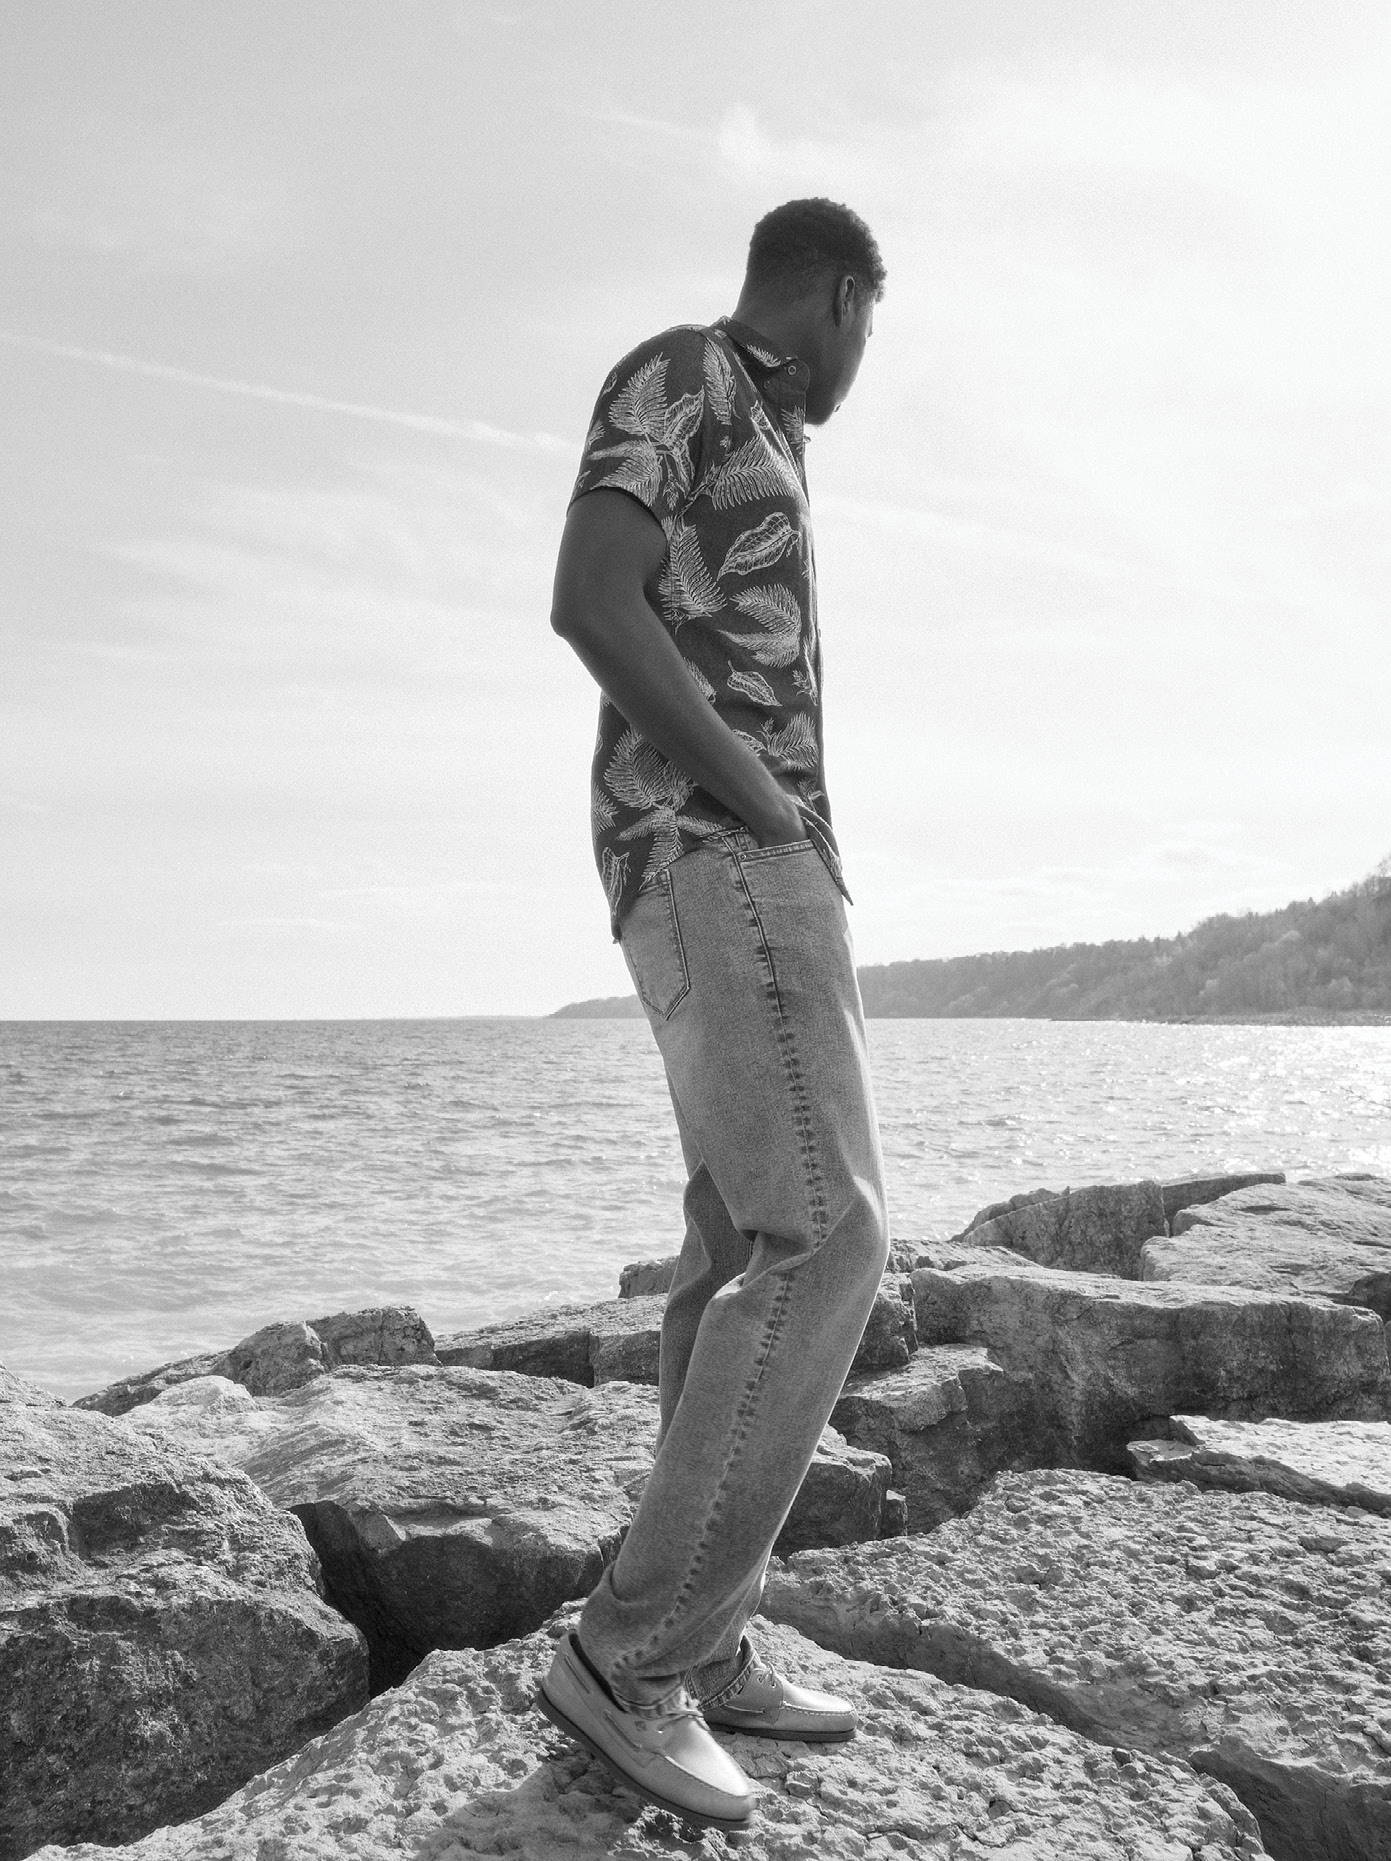 Tall man standing on rocks by the water wearing a floral shirt and light wash jeans